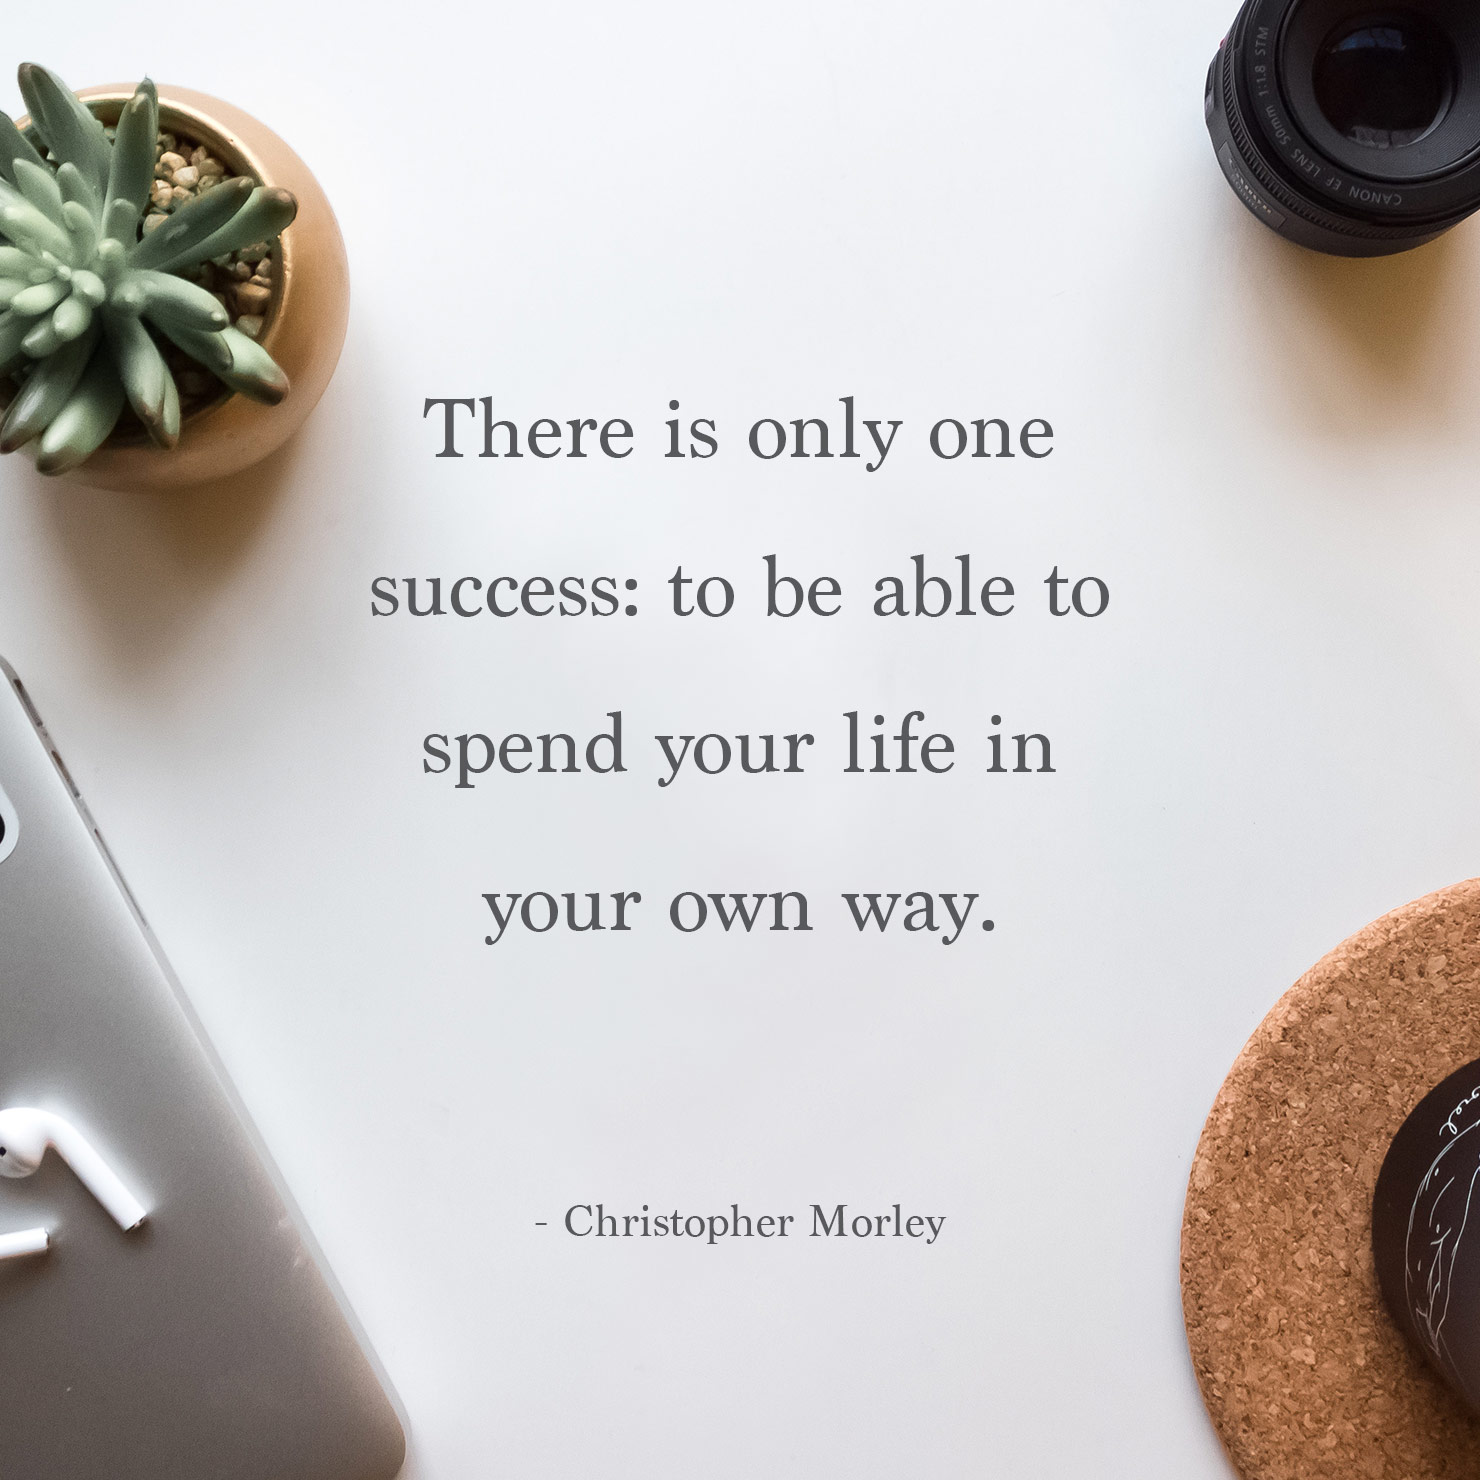 for son graduation quote: there is only one success; to be able to spend your life in your own way - Christopher Morley